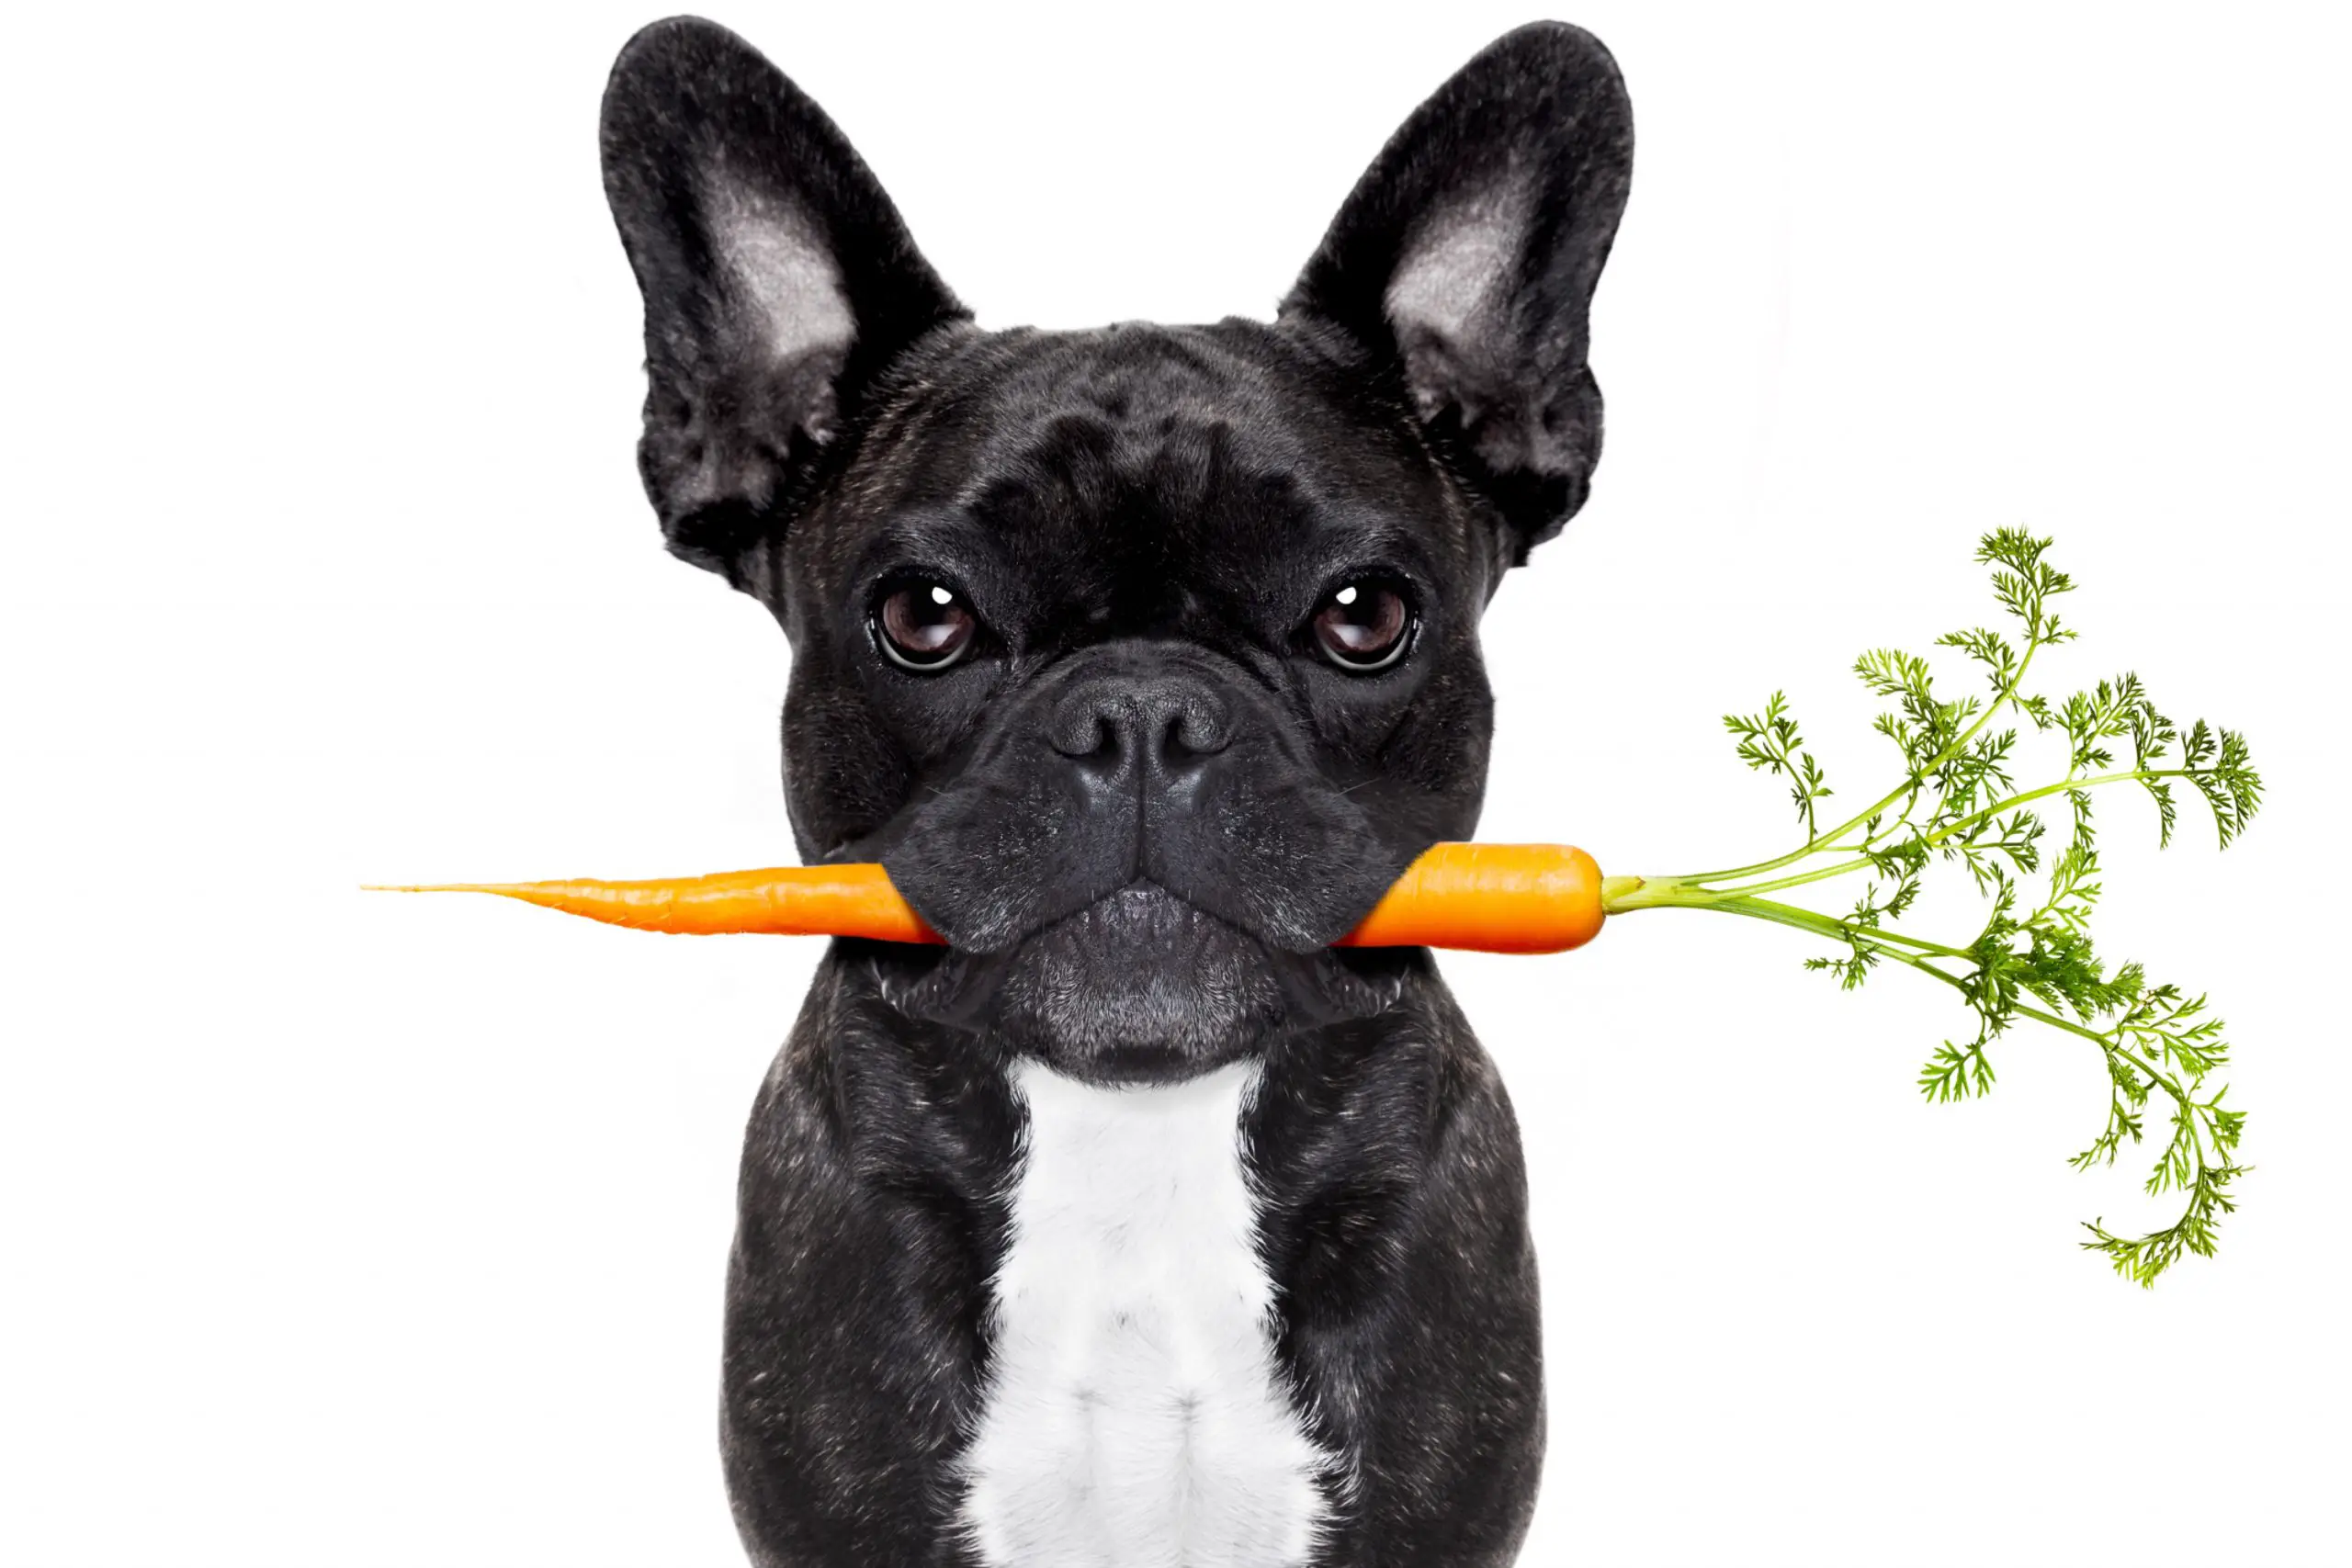 are carrots good for french bulldogs